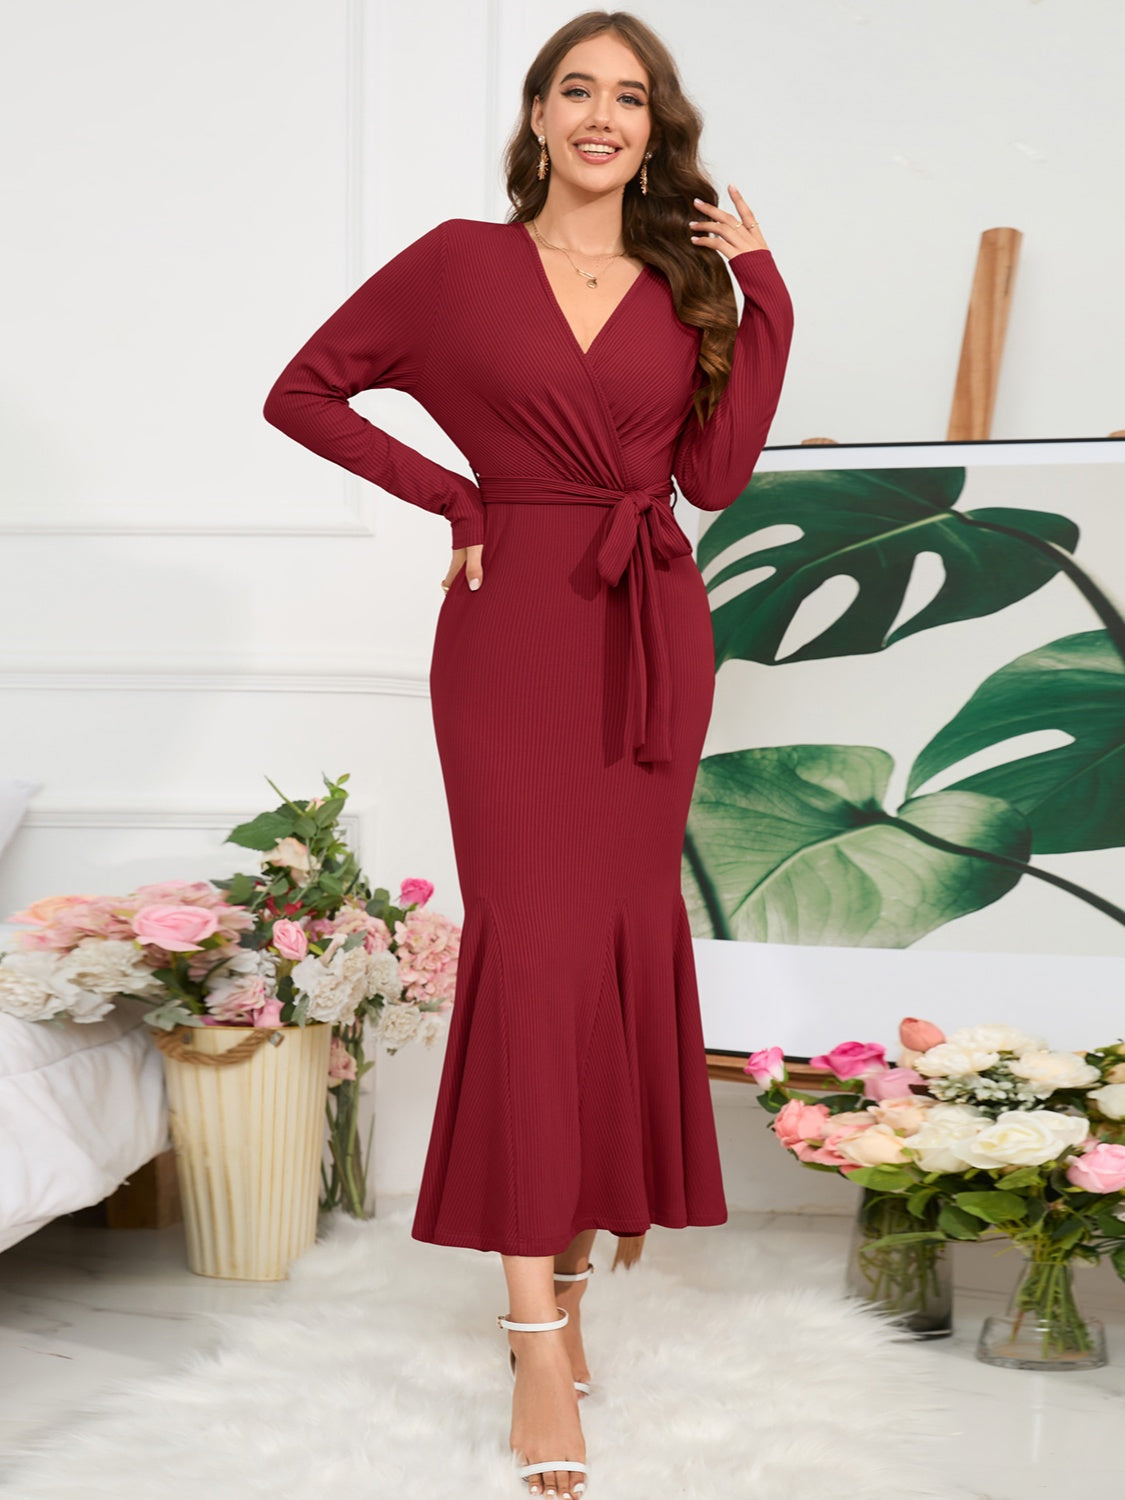 Surplice Neck Tie Waist Dress - Tophatter Deals and Online Shopping - Electronics, Jewelry, Beauty, Health, Gadgets, Fashion - Tophatter's Discounts & Offers - tophatters - tophatters.co